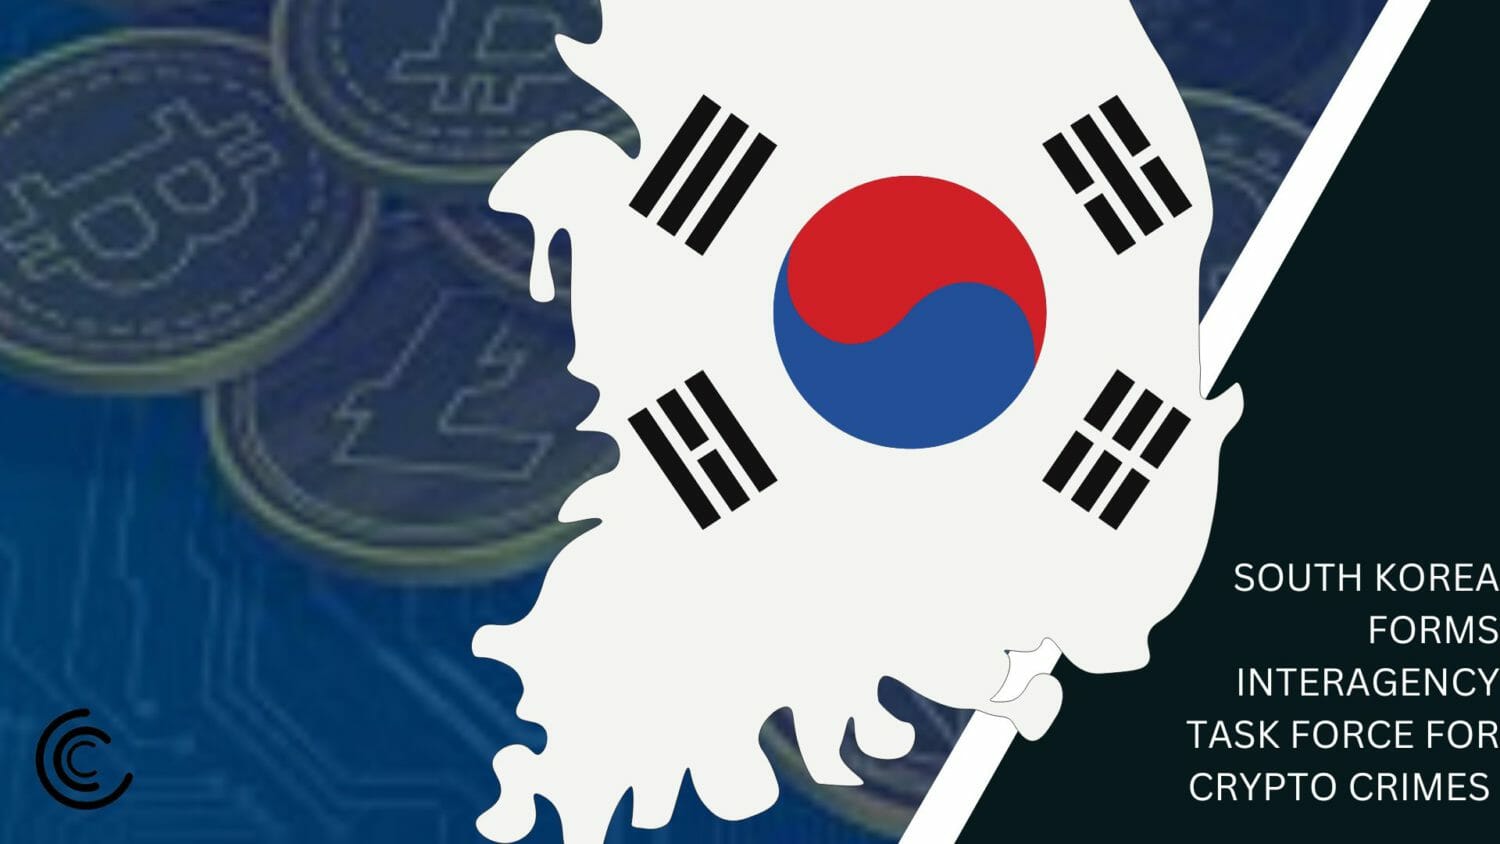 South Korea Forms Interagency Task Force For Crypto Crimes